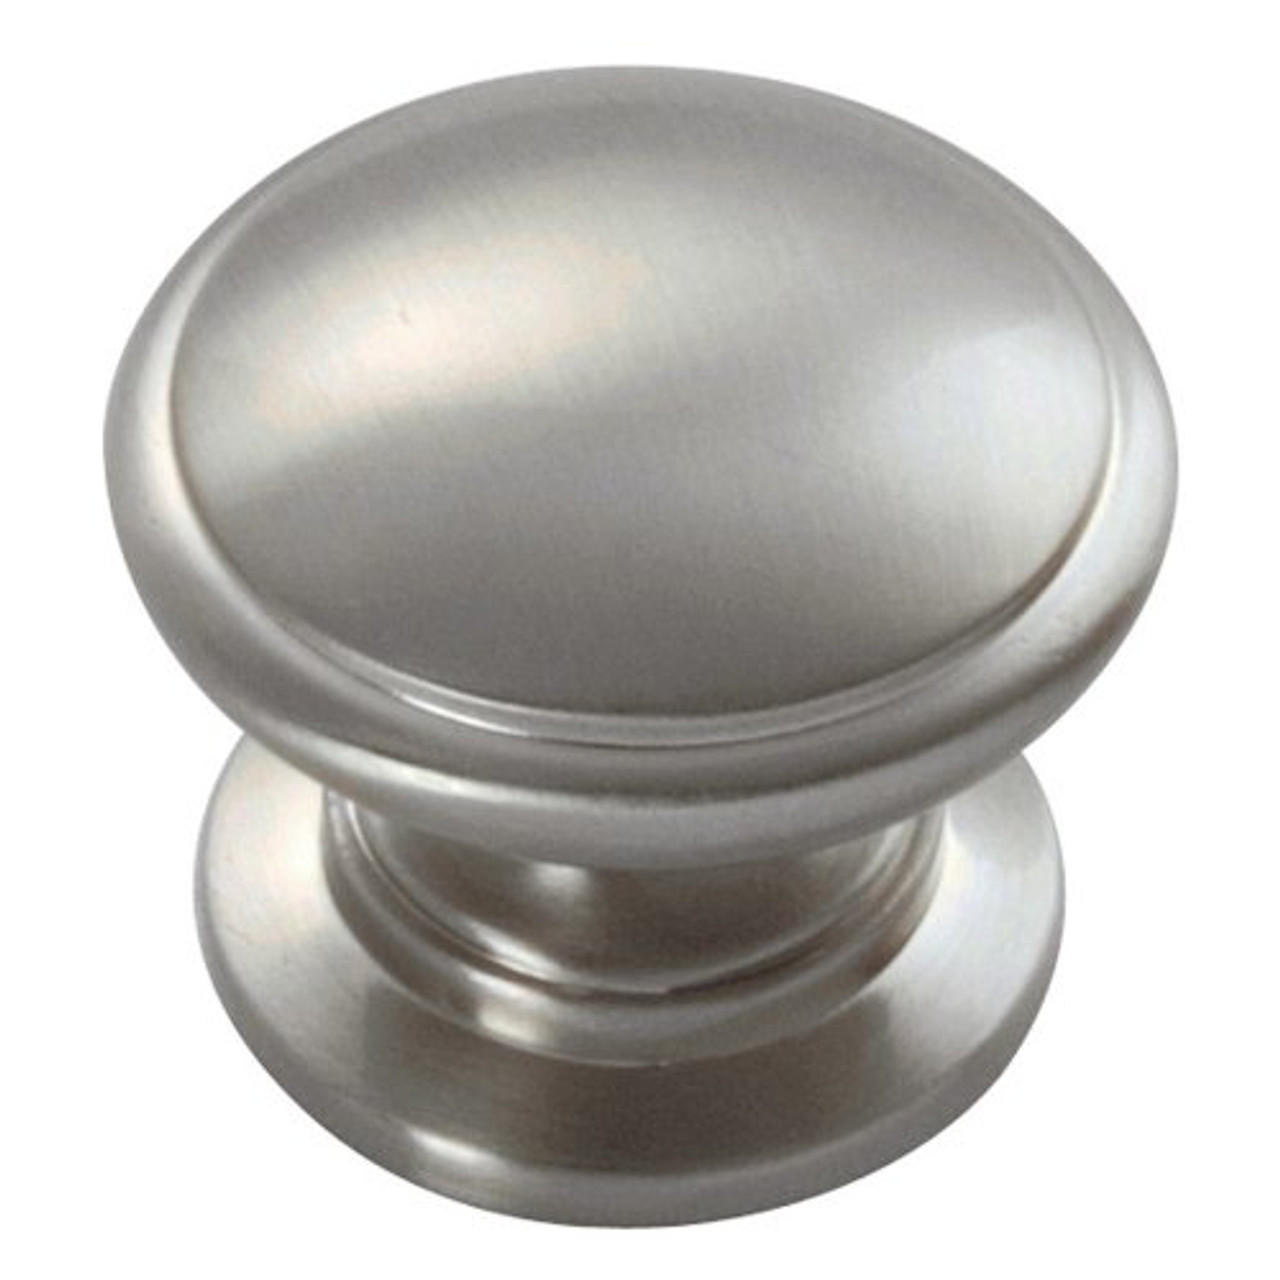 Hickory Hardware 1-1/4 INCH (32MM) WILLIAMSBURG CABINET KNOBS